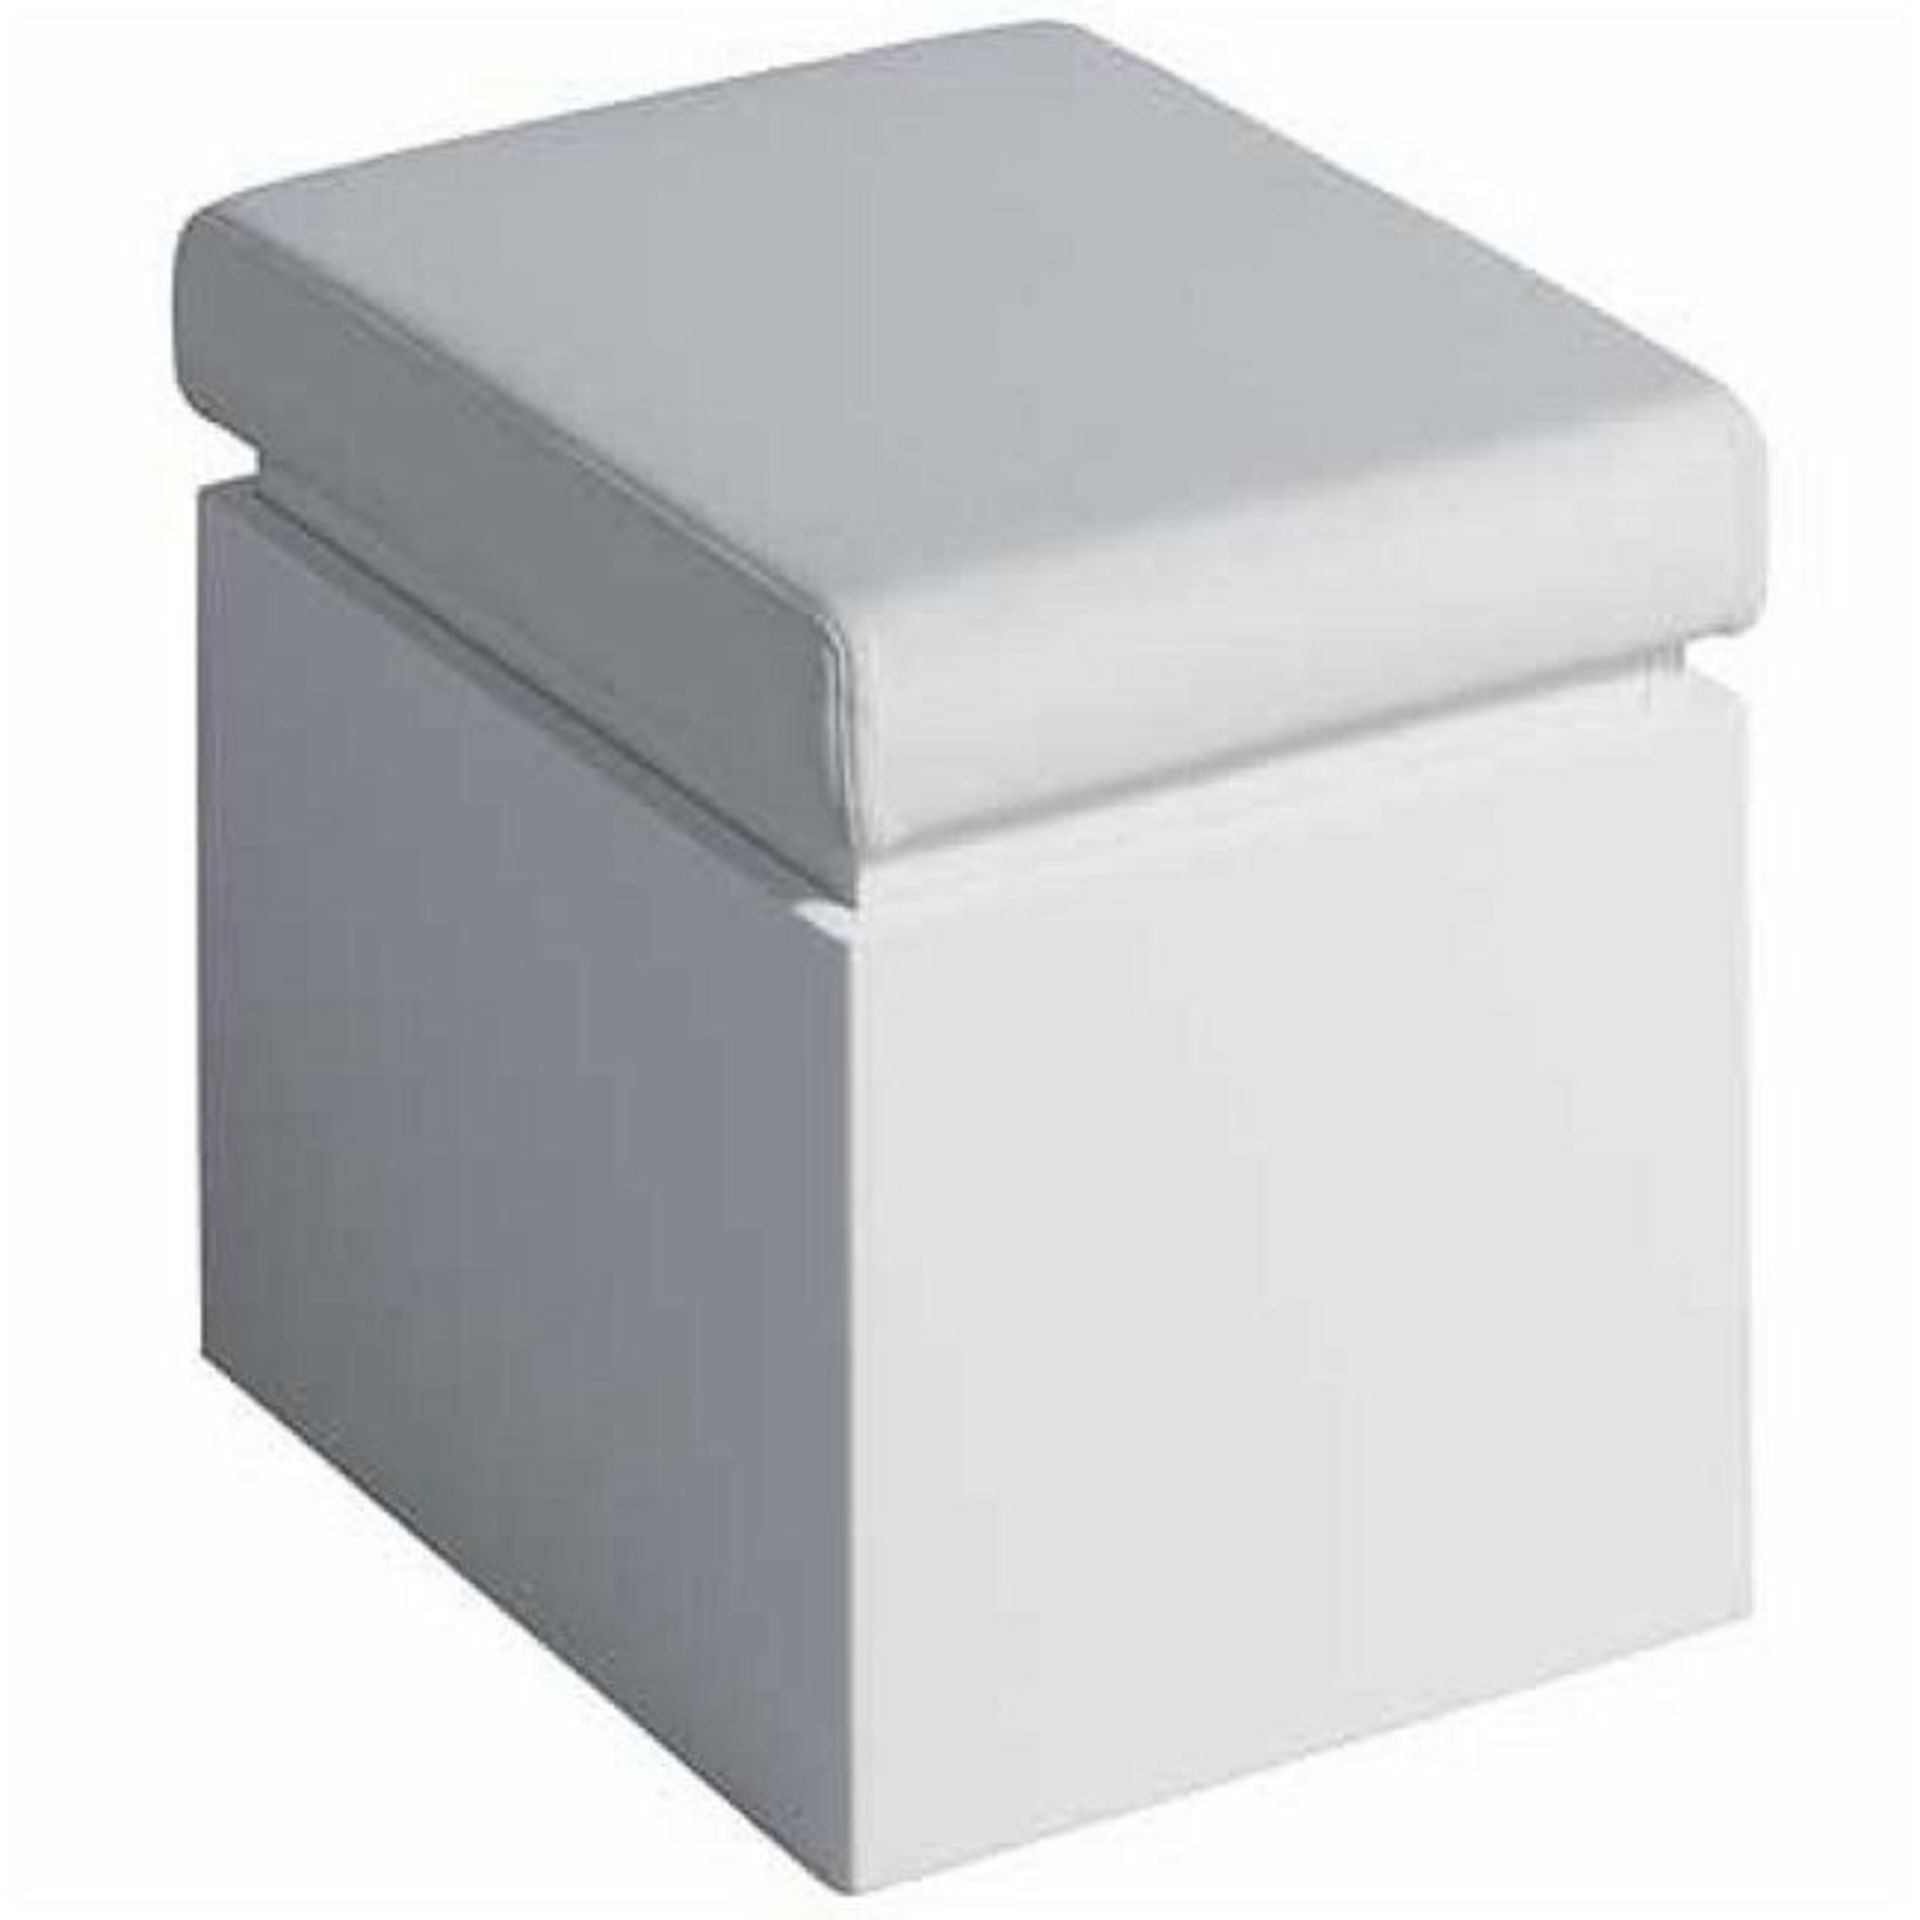 New Twyford White Bathroom Seat With Storage Is Designed With A Stunning White Finish, Enhancin... - Image 2 of 2